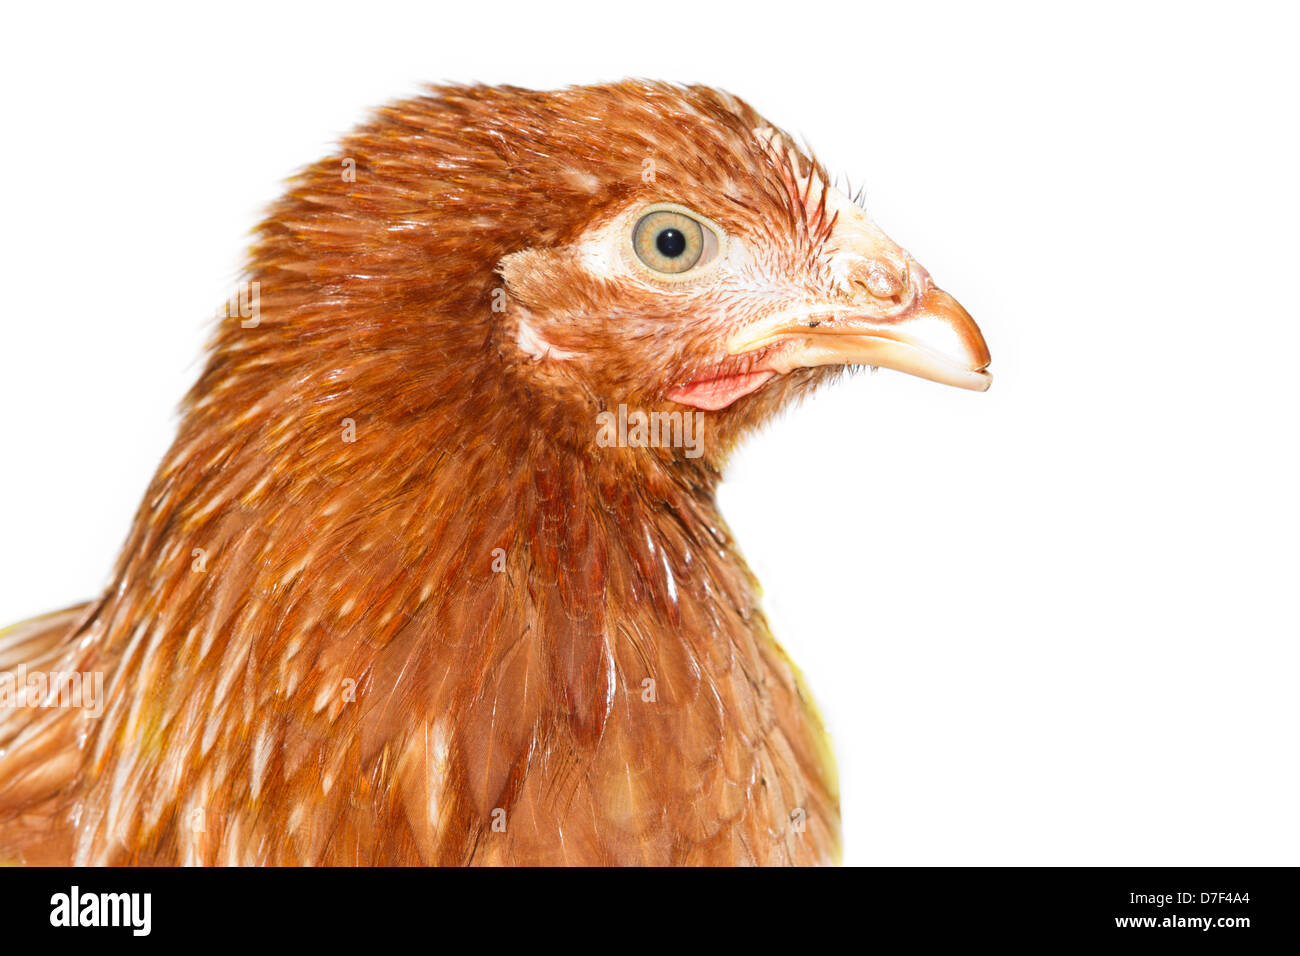 young pullet looking ahead Stock Photo